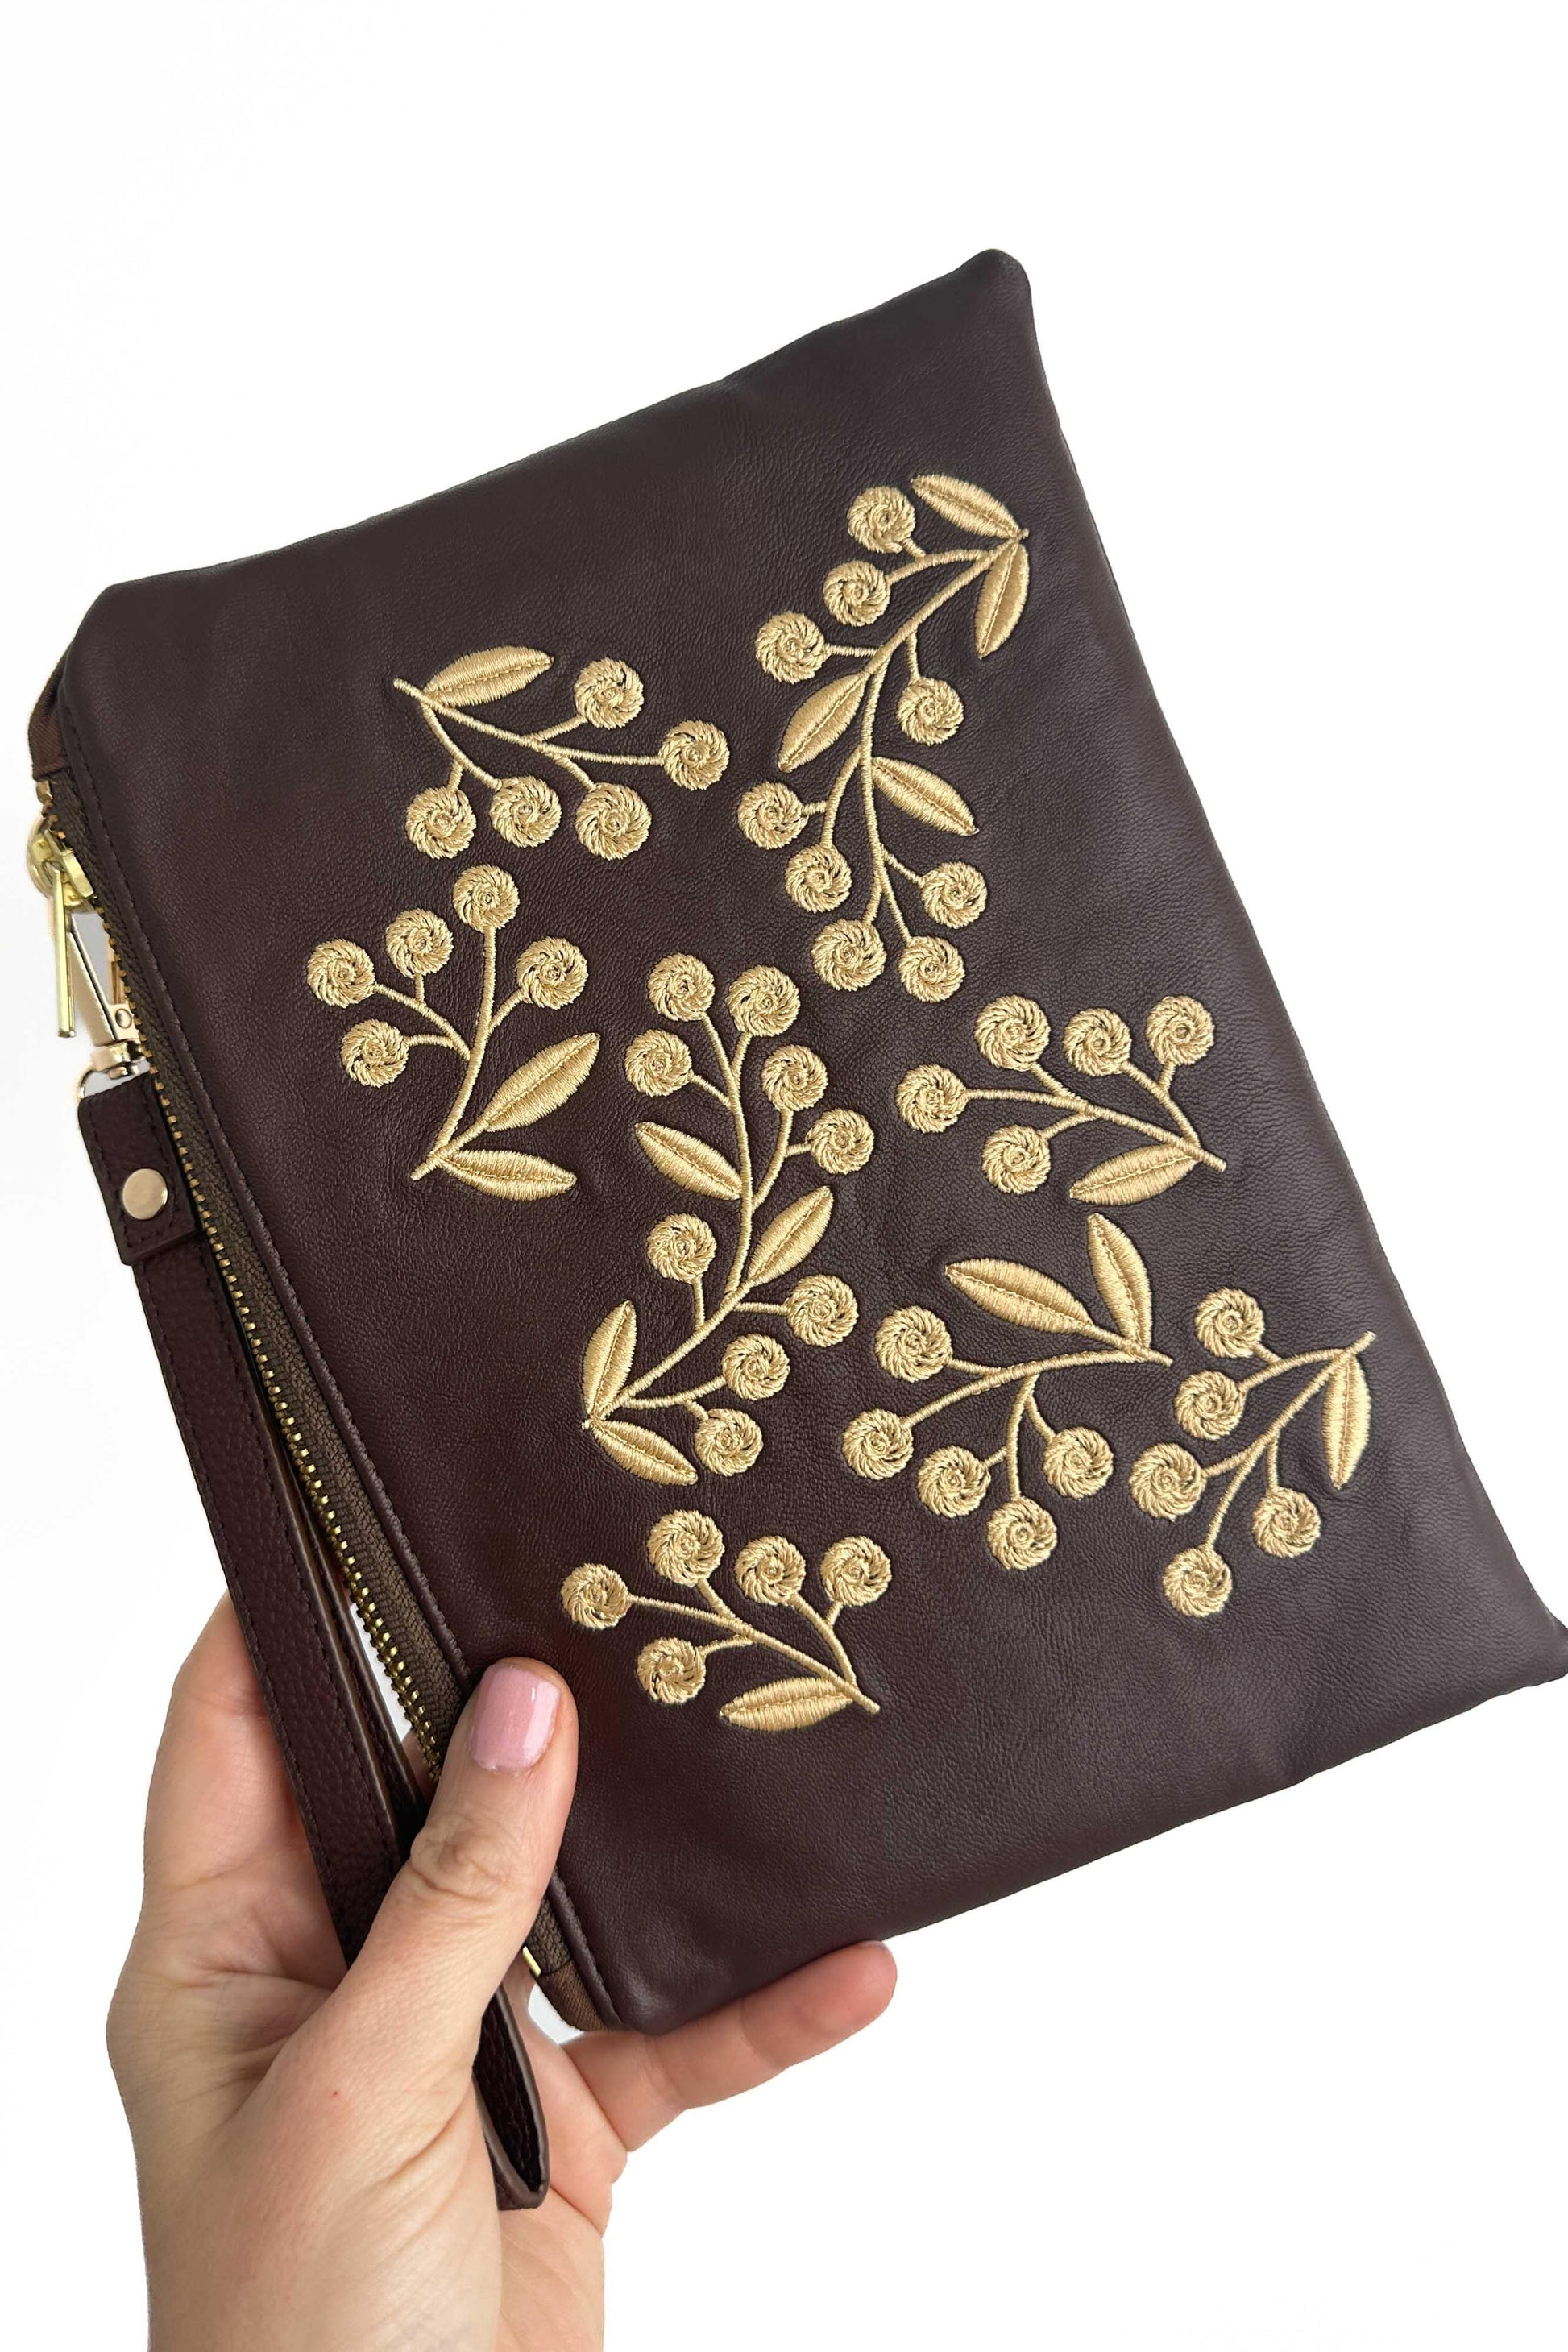 Classic Brown "Floral" Convertible Crossbody Wristlet+ READY TO SHIP - Modern Makerie